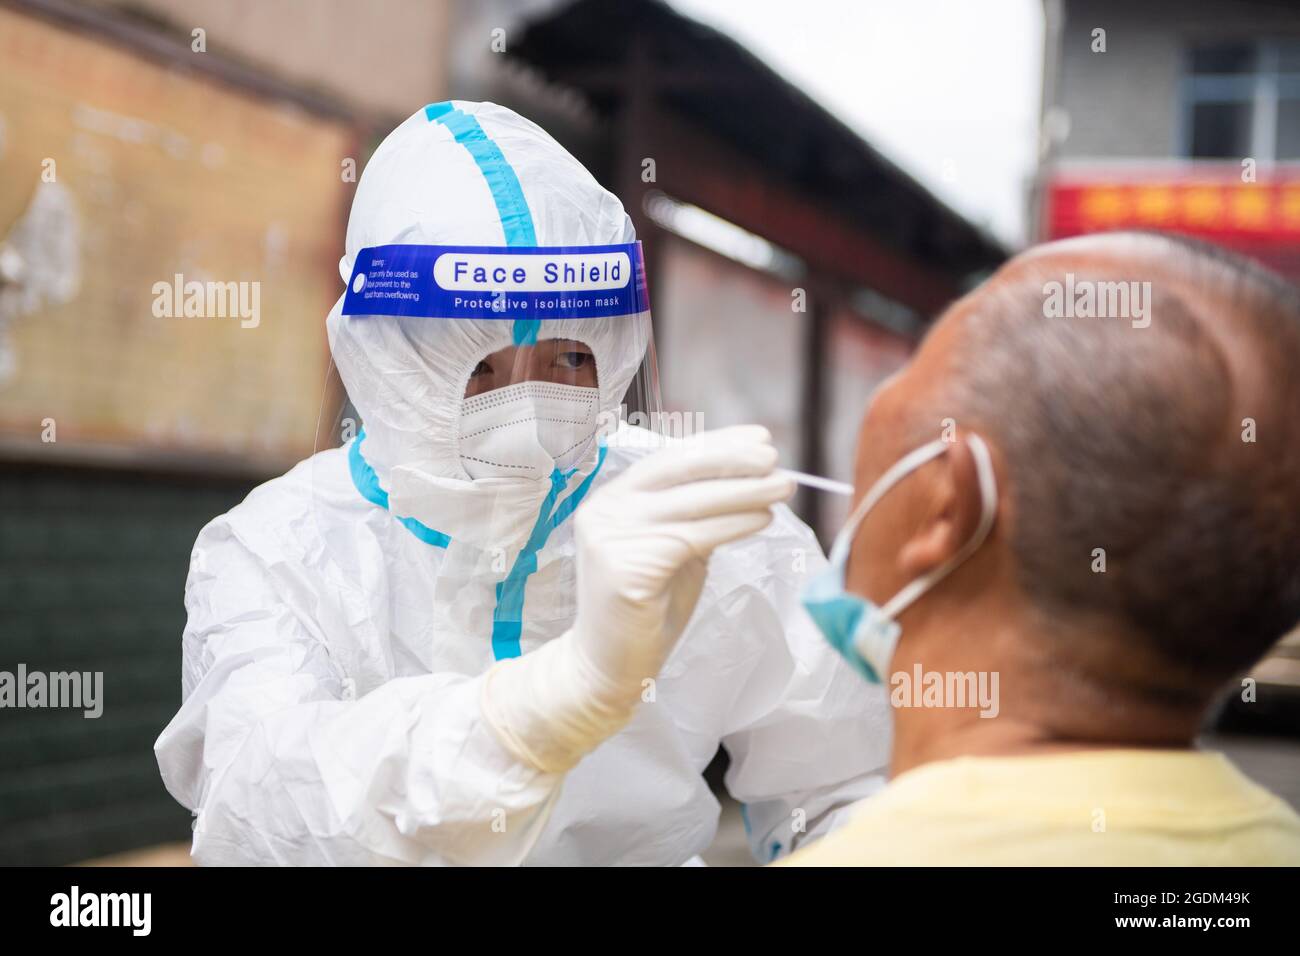 Zhangjiaje, China. 13th Aug, 2021. (210814) -- ZHANGJIAJIE, Aug. 14, 2021 (Xinhua) -- Luo Jinwu takes a throat swab sample from a resident for nucleic acid testing in Yangping Village of Yongding District in Zhangjiajie City, central China's Hunan Province, Aug. 12, 2021. Luo Jinwu and his wife Xiang Ka are medical workers from Zhangjiajie Hospital of Traditional Chinese Medicine. Since the recent resurgence of COVID-19 in Zhangjiajie from July 29, Luo has been conducting nucleic acid tests especially in the countryside, while Xiang has stationed in the hospital to attend to patients. Being ap Stock Photo